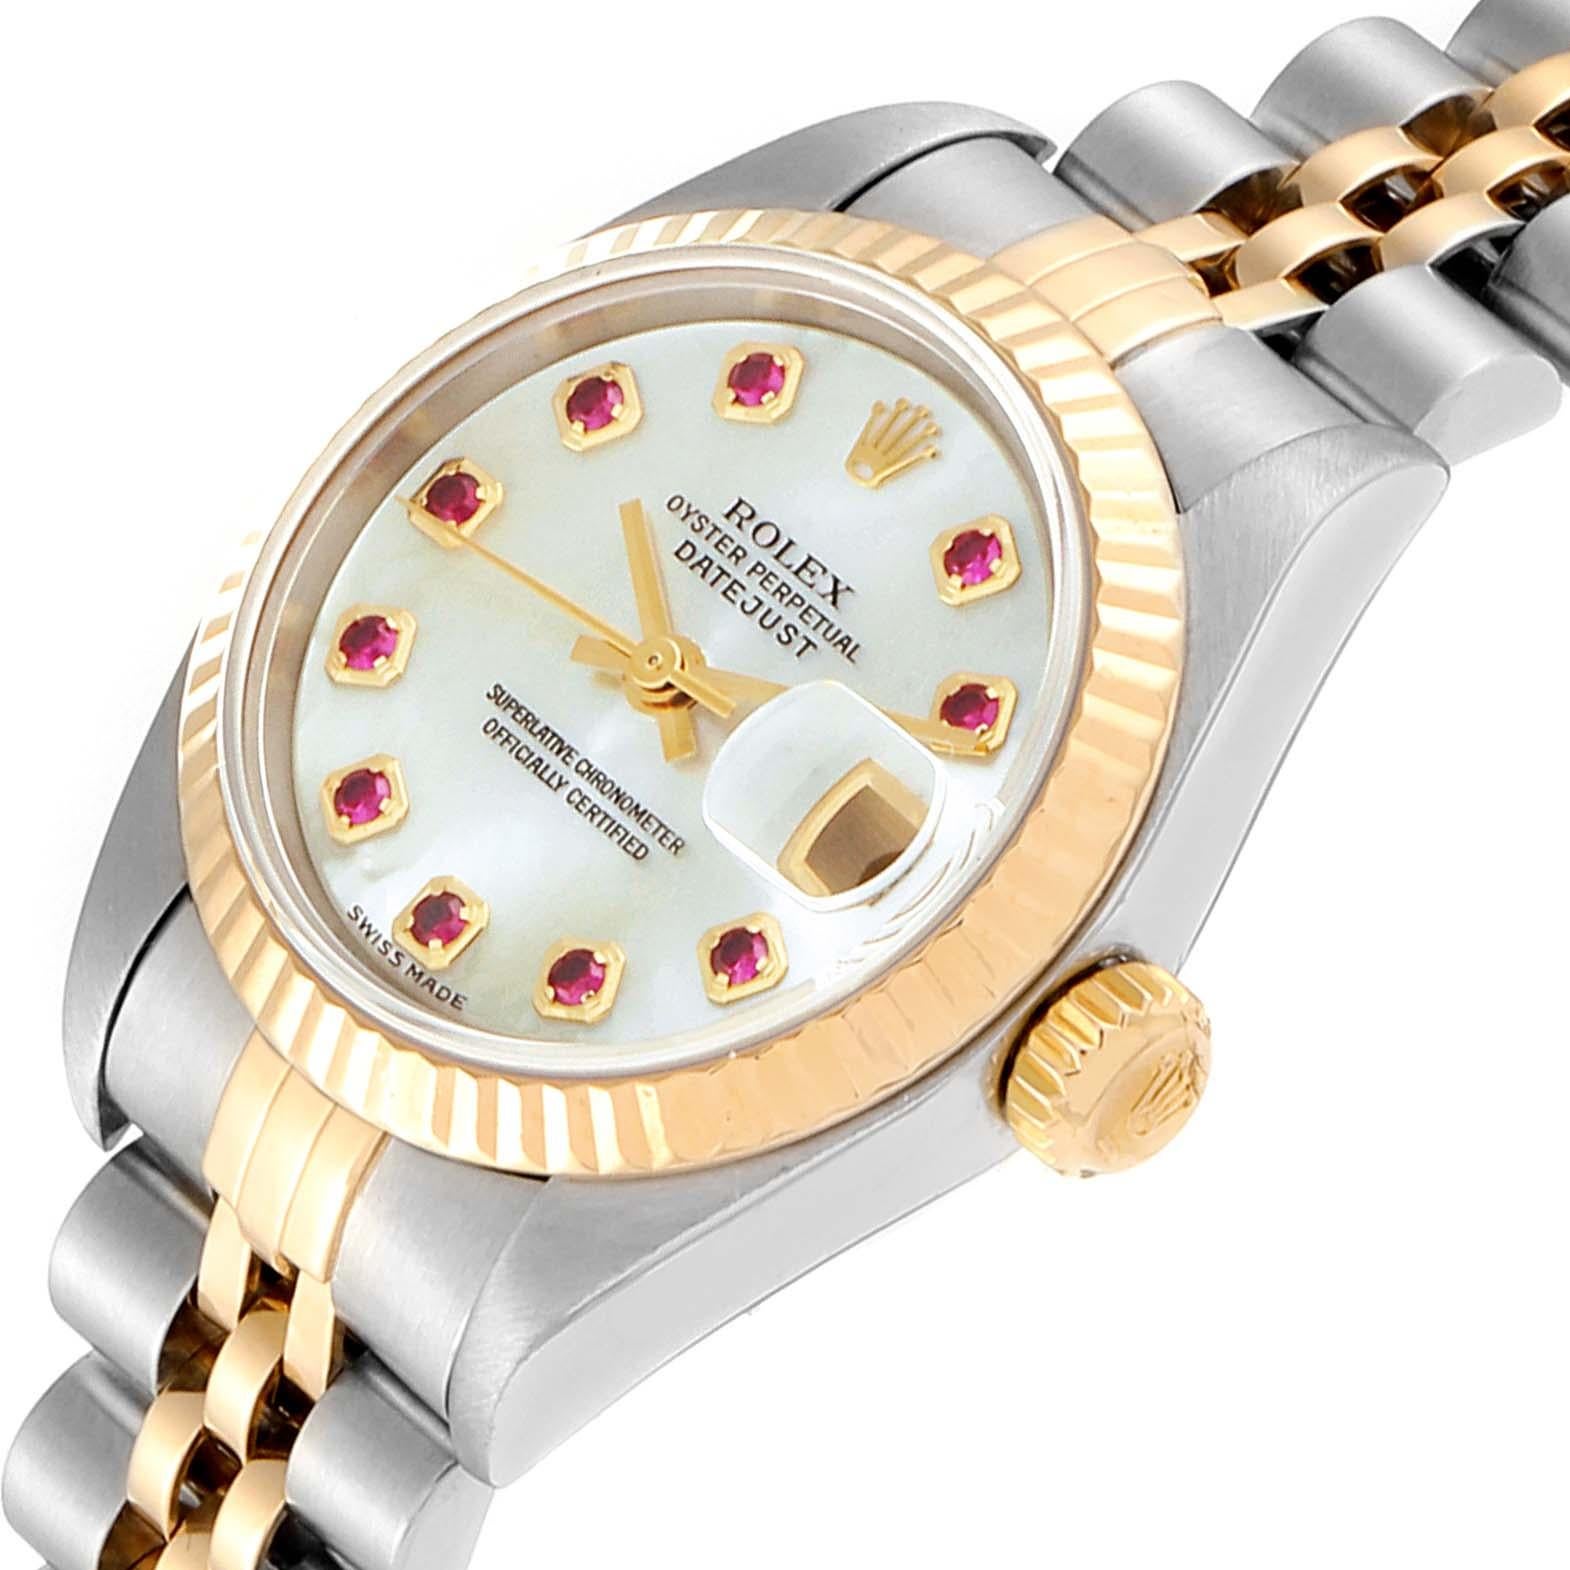 Women's Rolex Datejust Steel Yellow Gold MOP Ruby Ladies Watch 79173 Box Papers For Sale